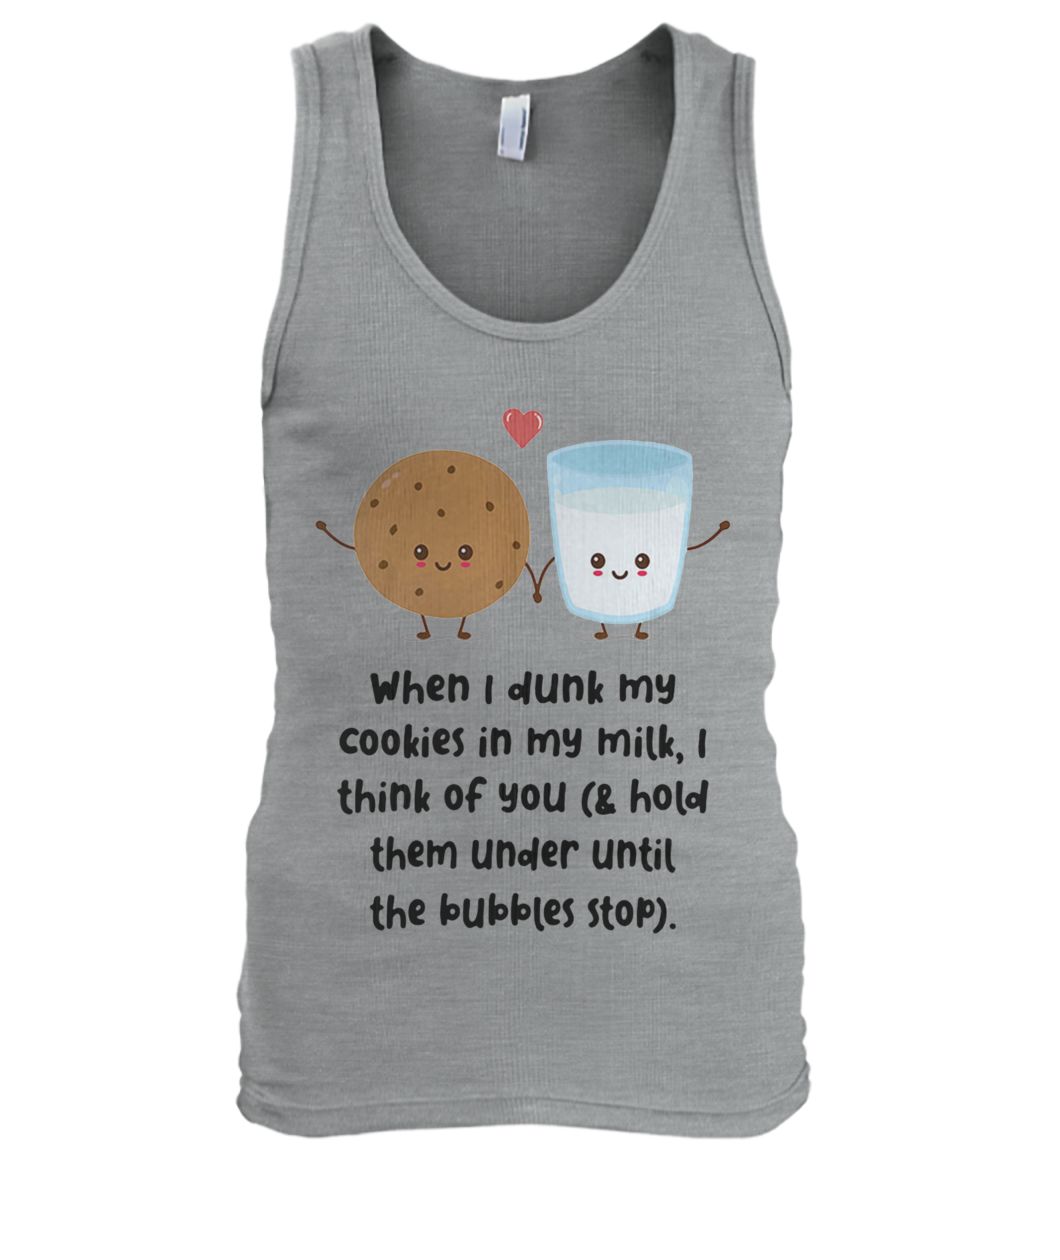 When I dunk my cookies in my milk I think of you men's tank top